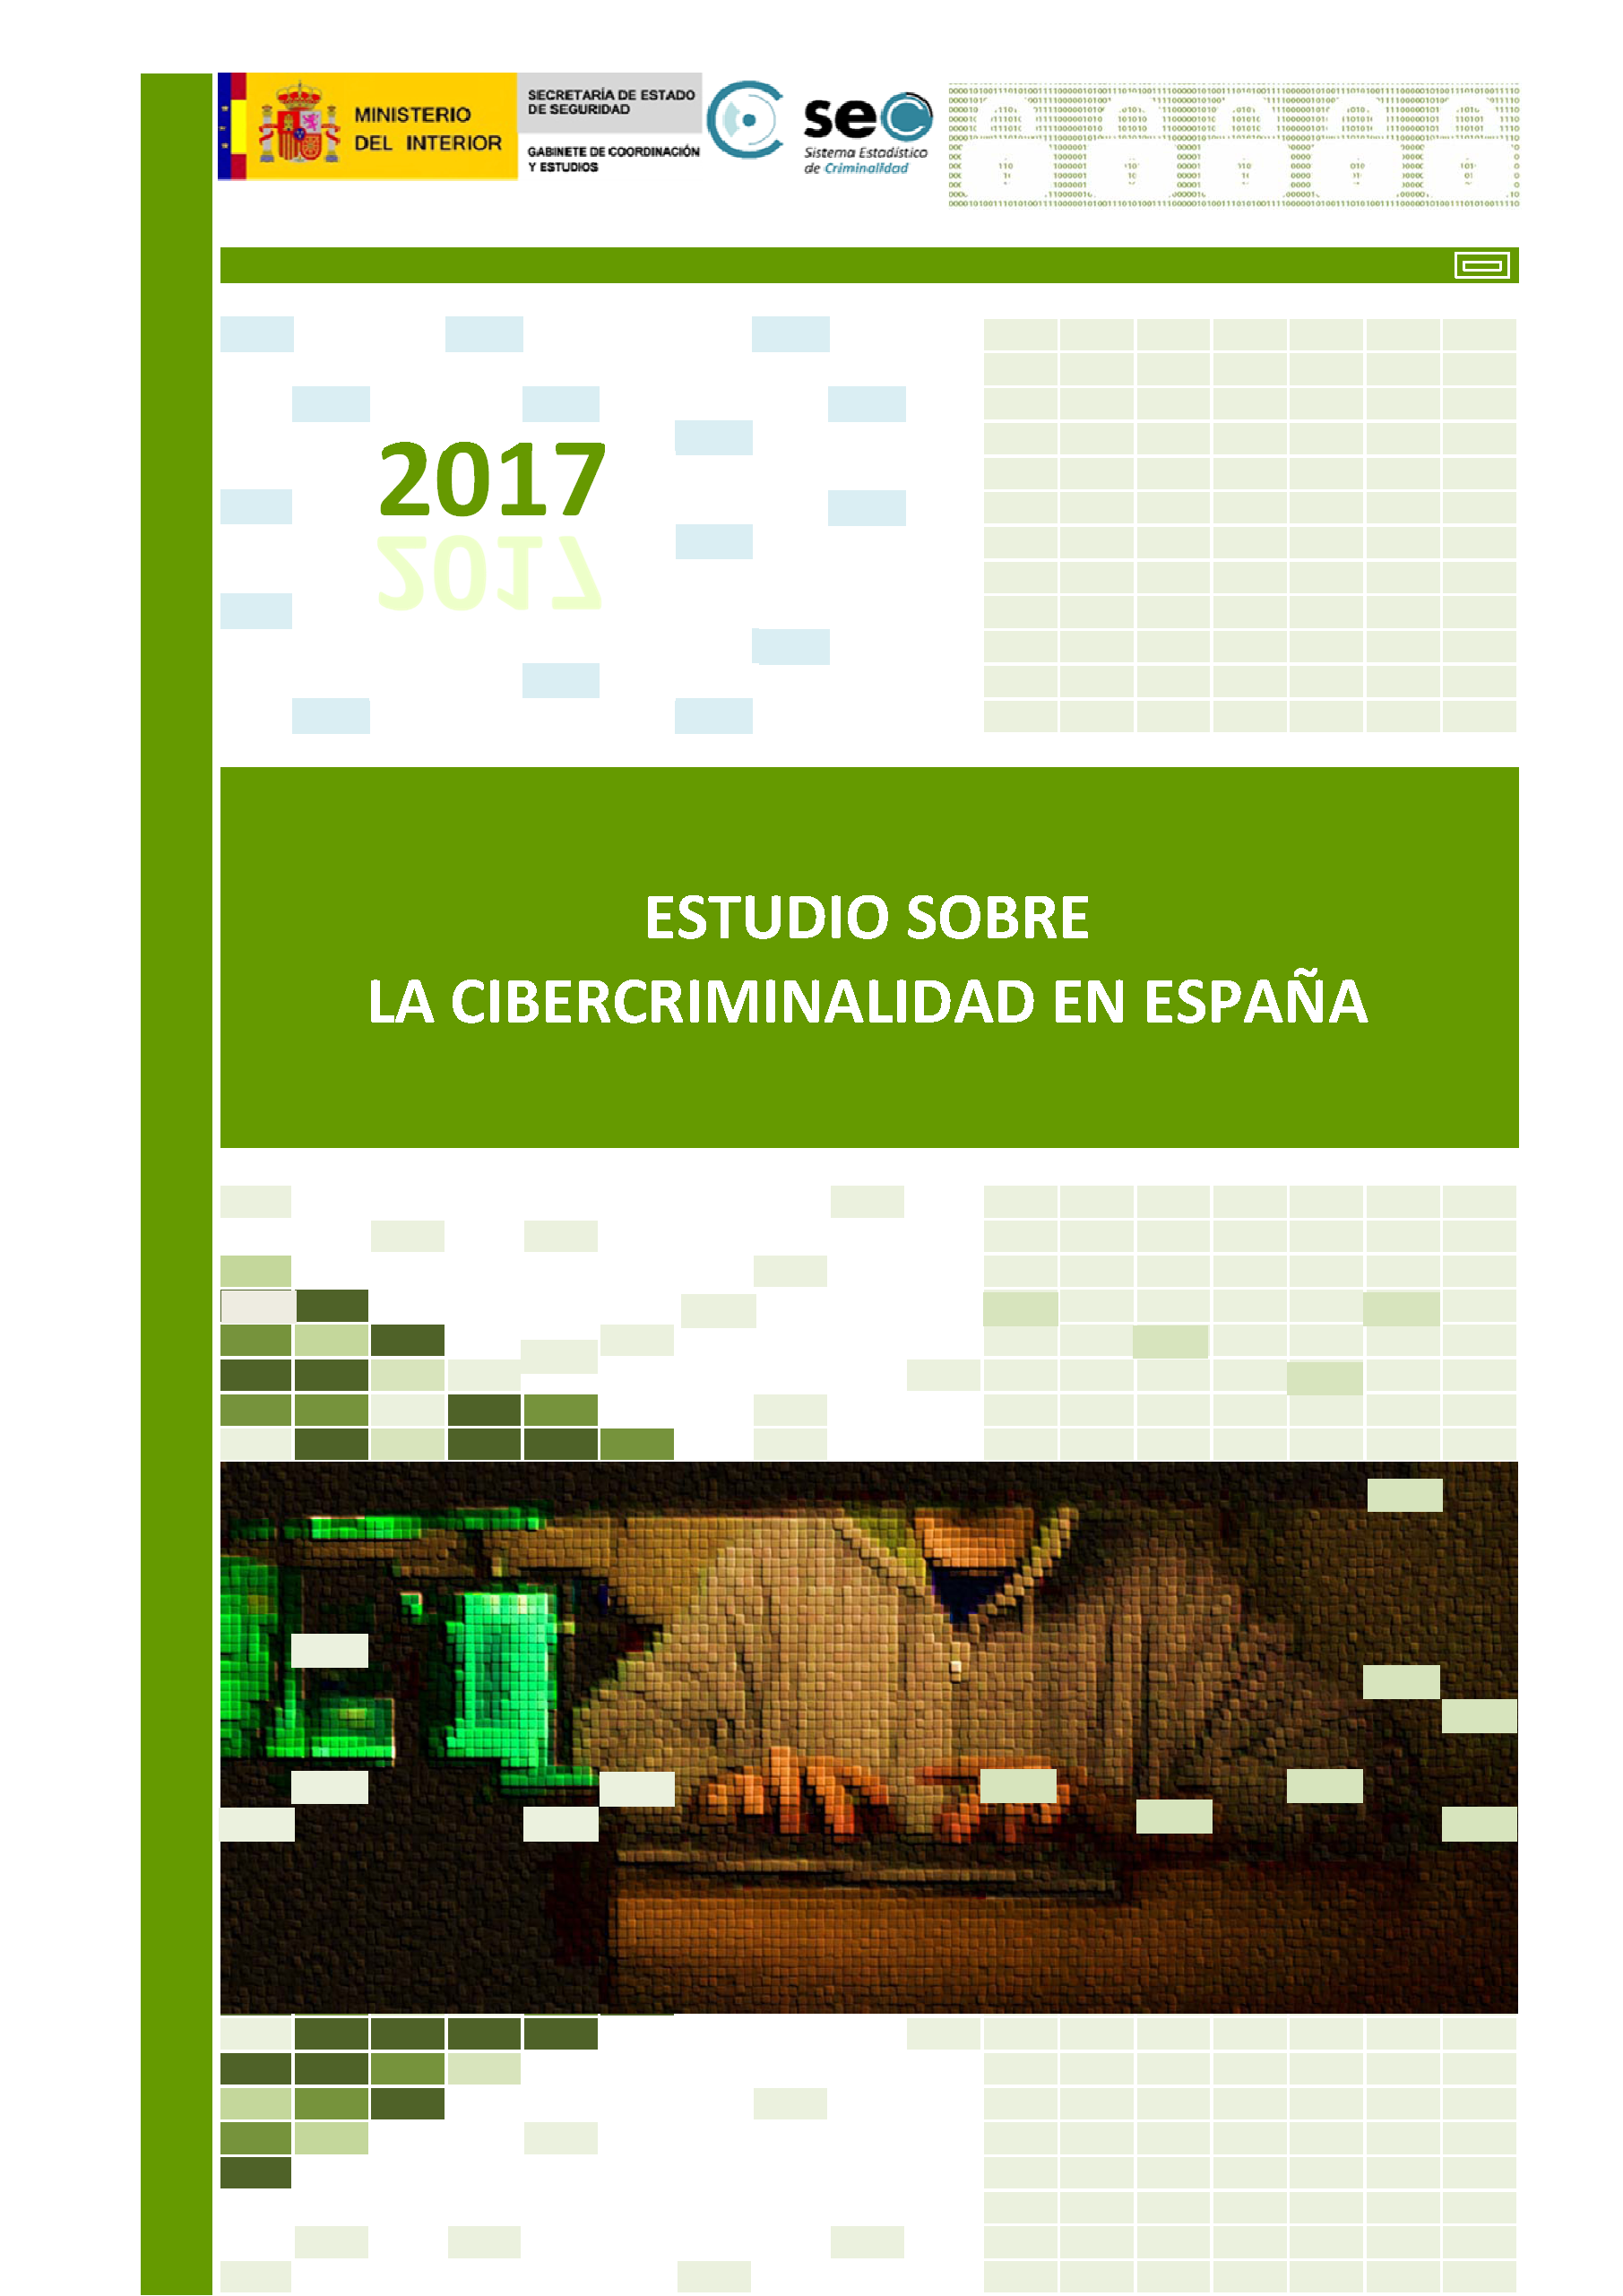 2017 Report on Cybercrime in Spain